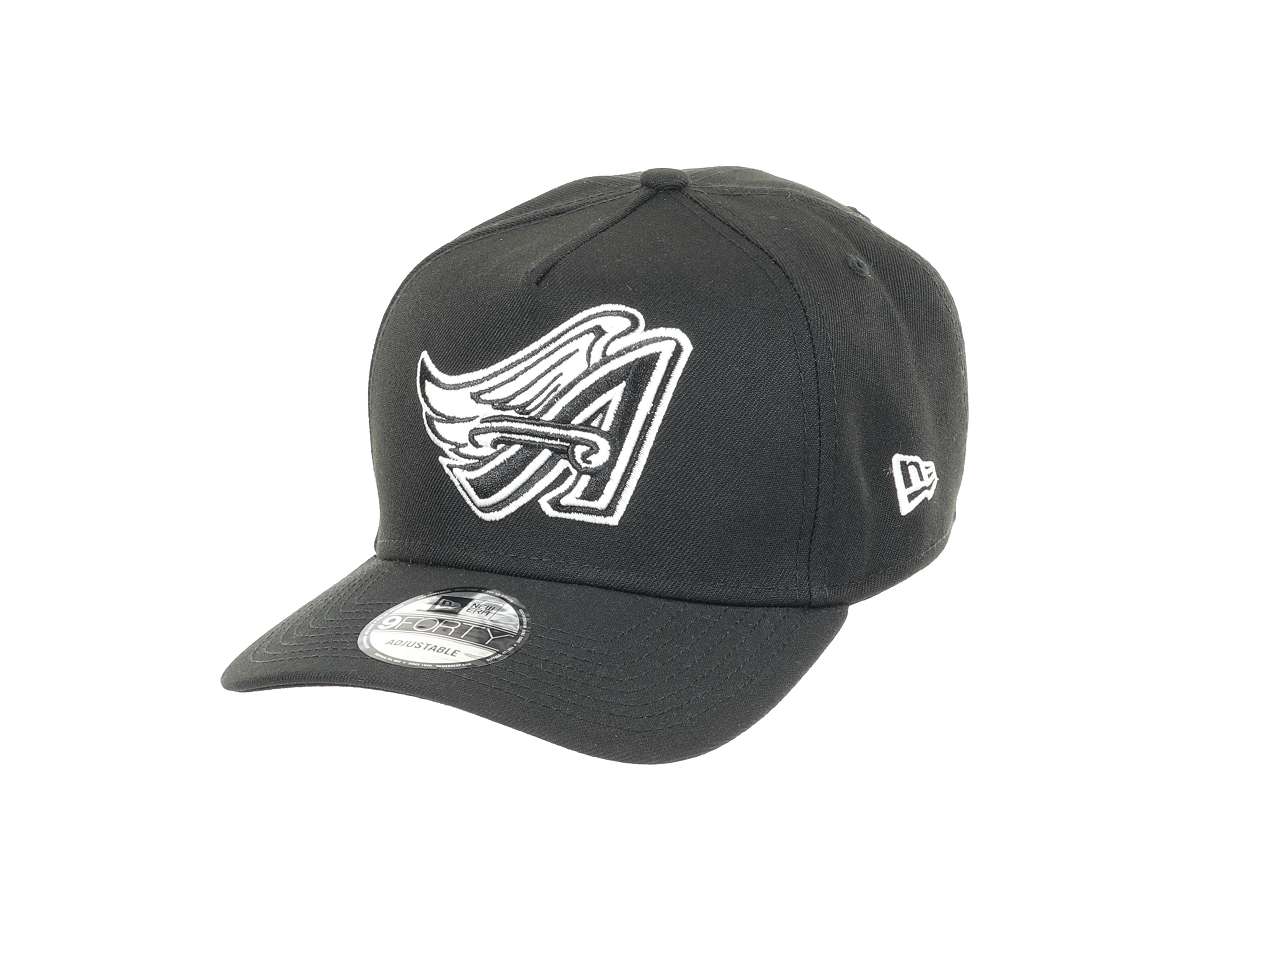  Anaheim Angels MLB Black and White Collection 9Forty A-Frame Snapback Cap New Era